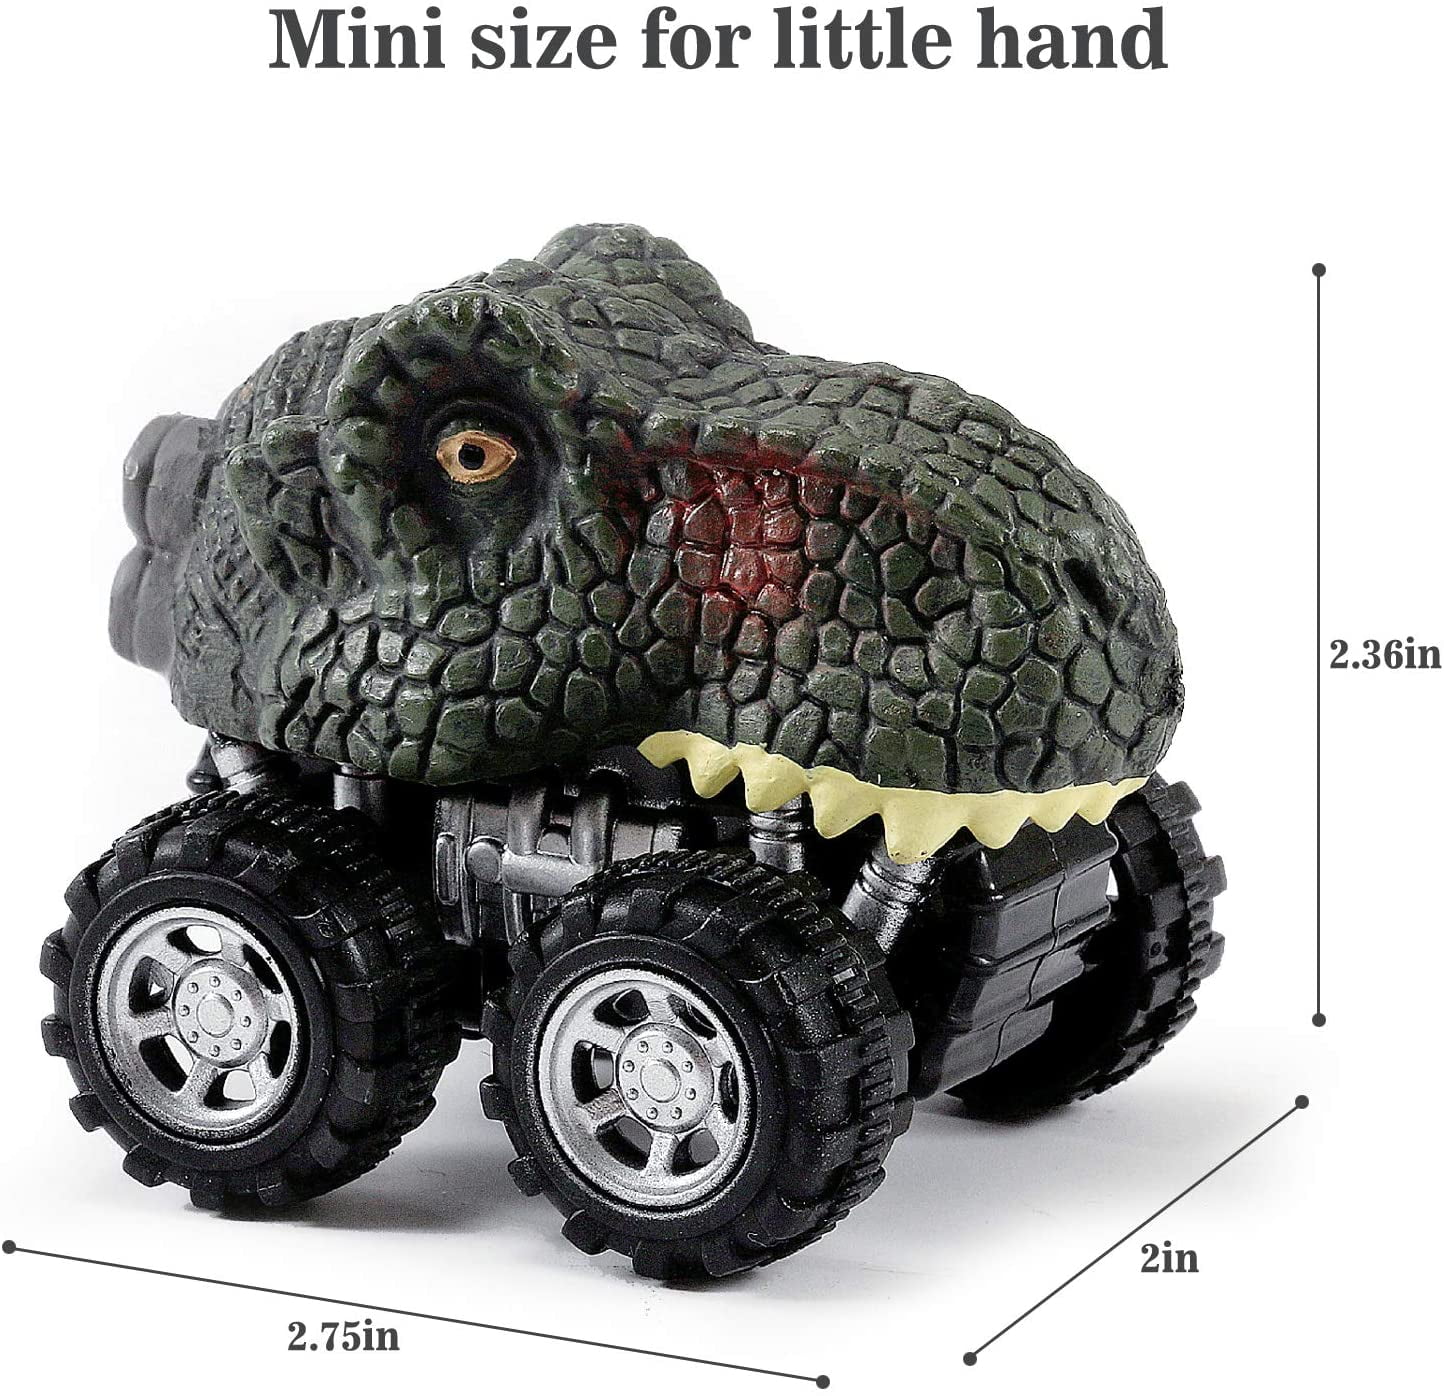 Toddler Girls Boys Toys Age 4 3 5 6 7 Gifts TEKFUN Dinosaur Toys for Kids 3-5 Years 13 in 1 Dinosaur Truck with Music and Light Dinosaur Carrier Playset with 3 Pull Back Cars and 9 Dinosaur Figures 